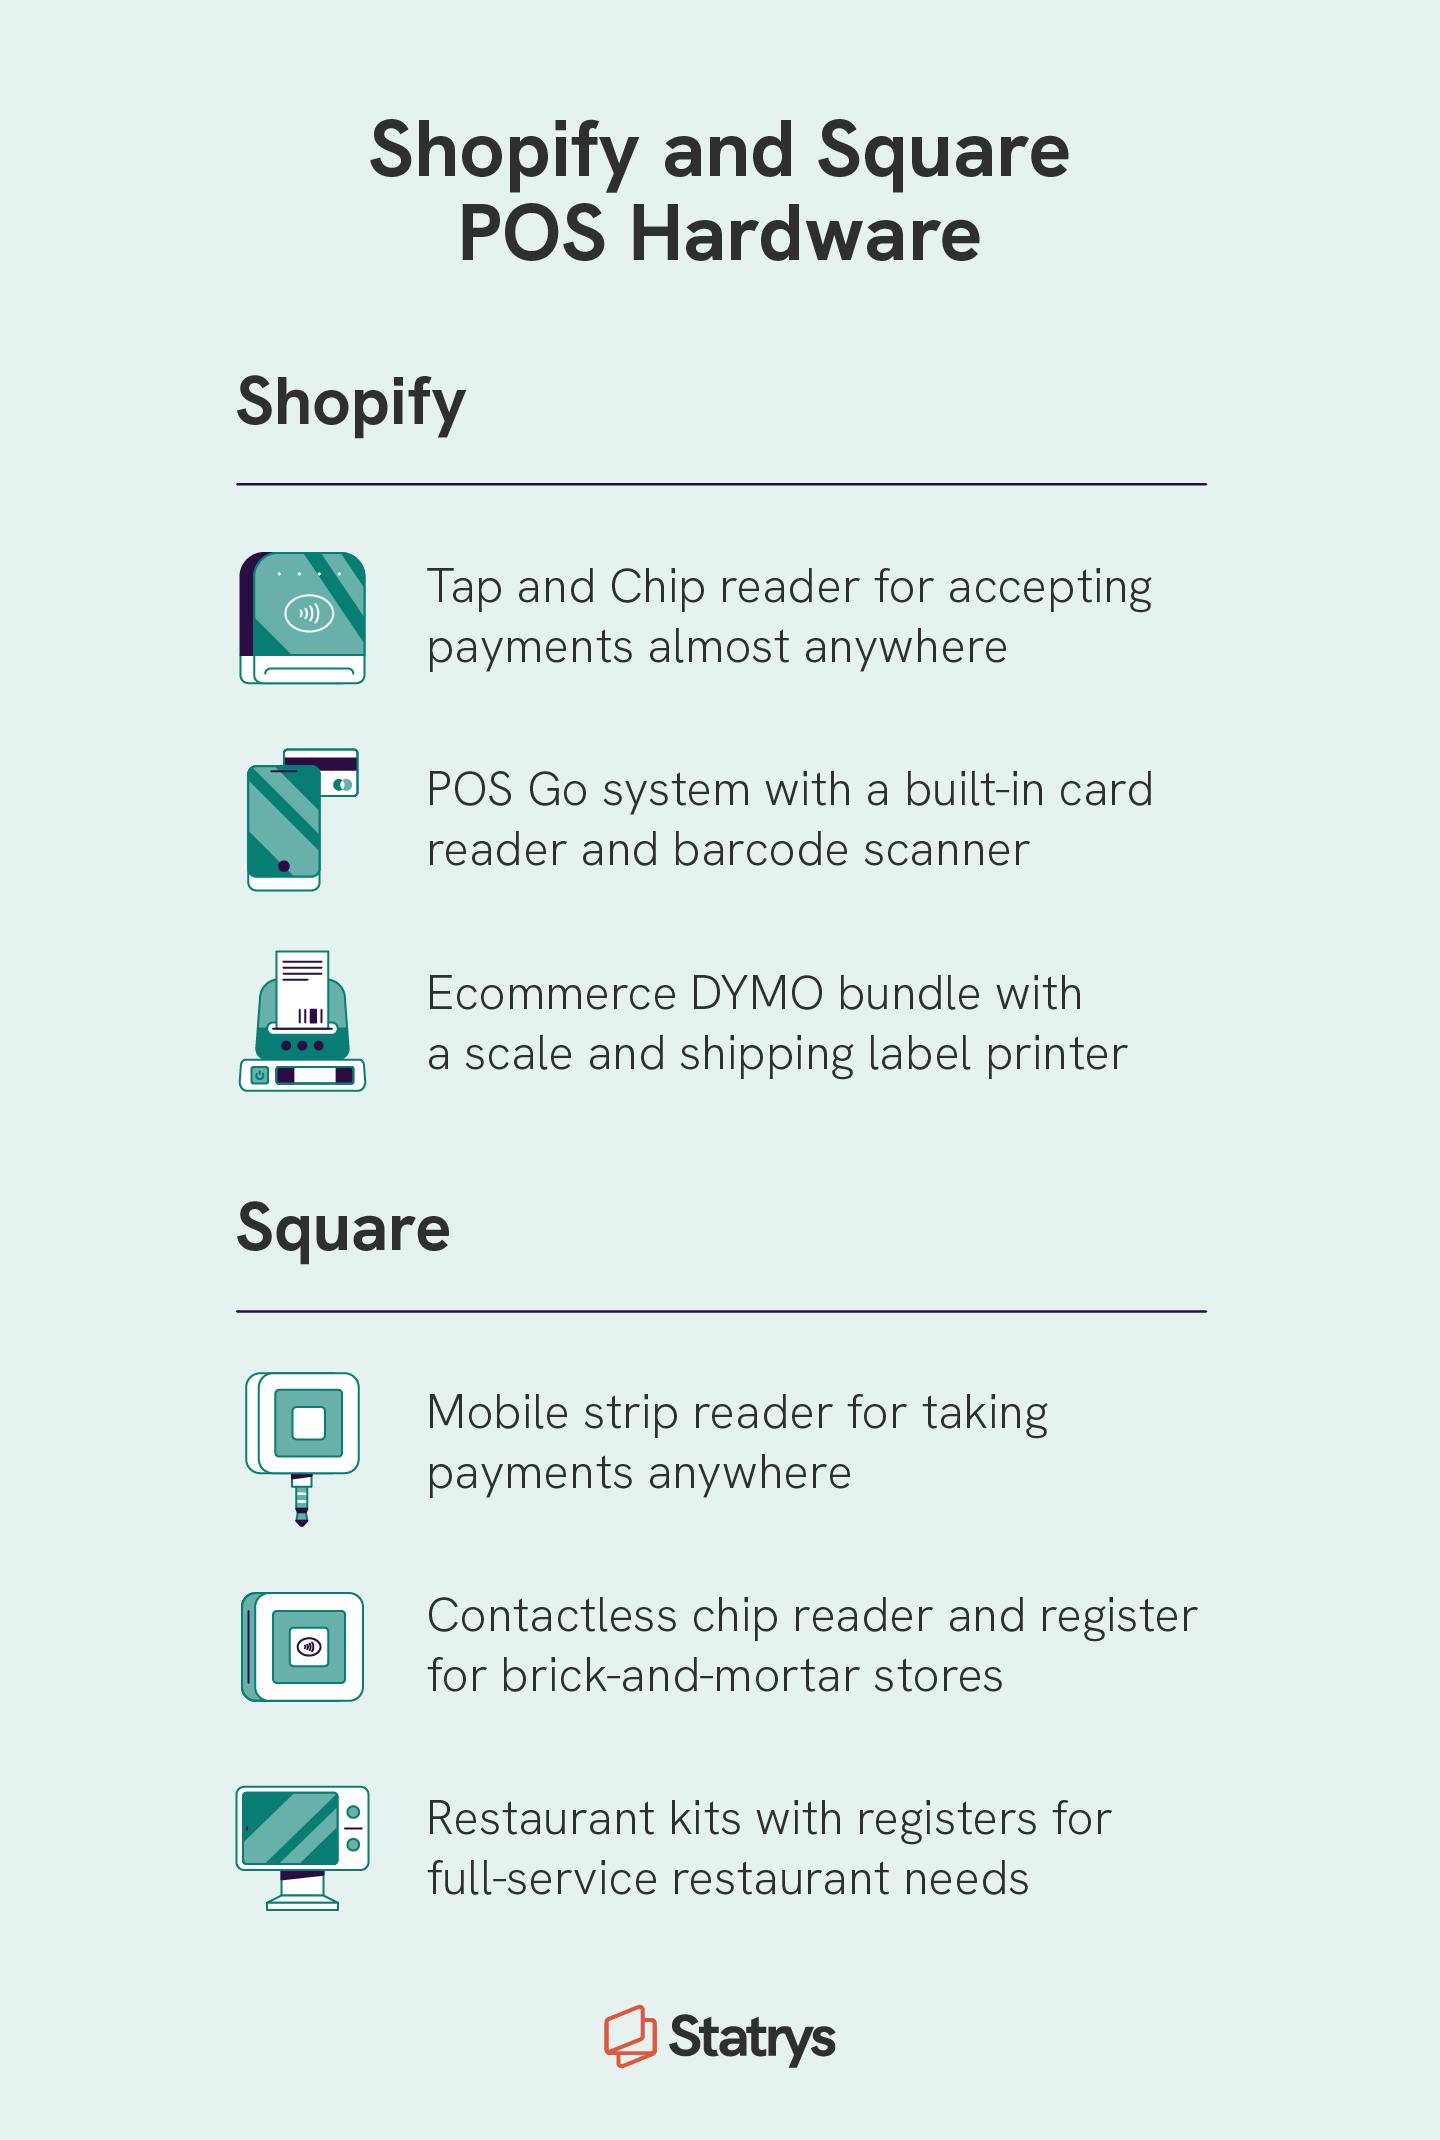 Six icons represent differences in Shopify vs Square’s POS hardware.